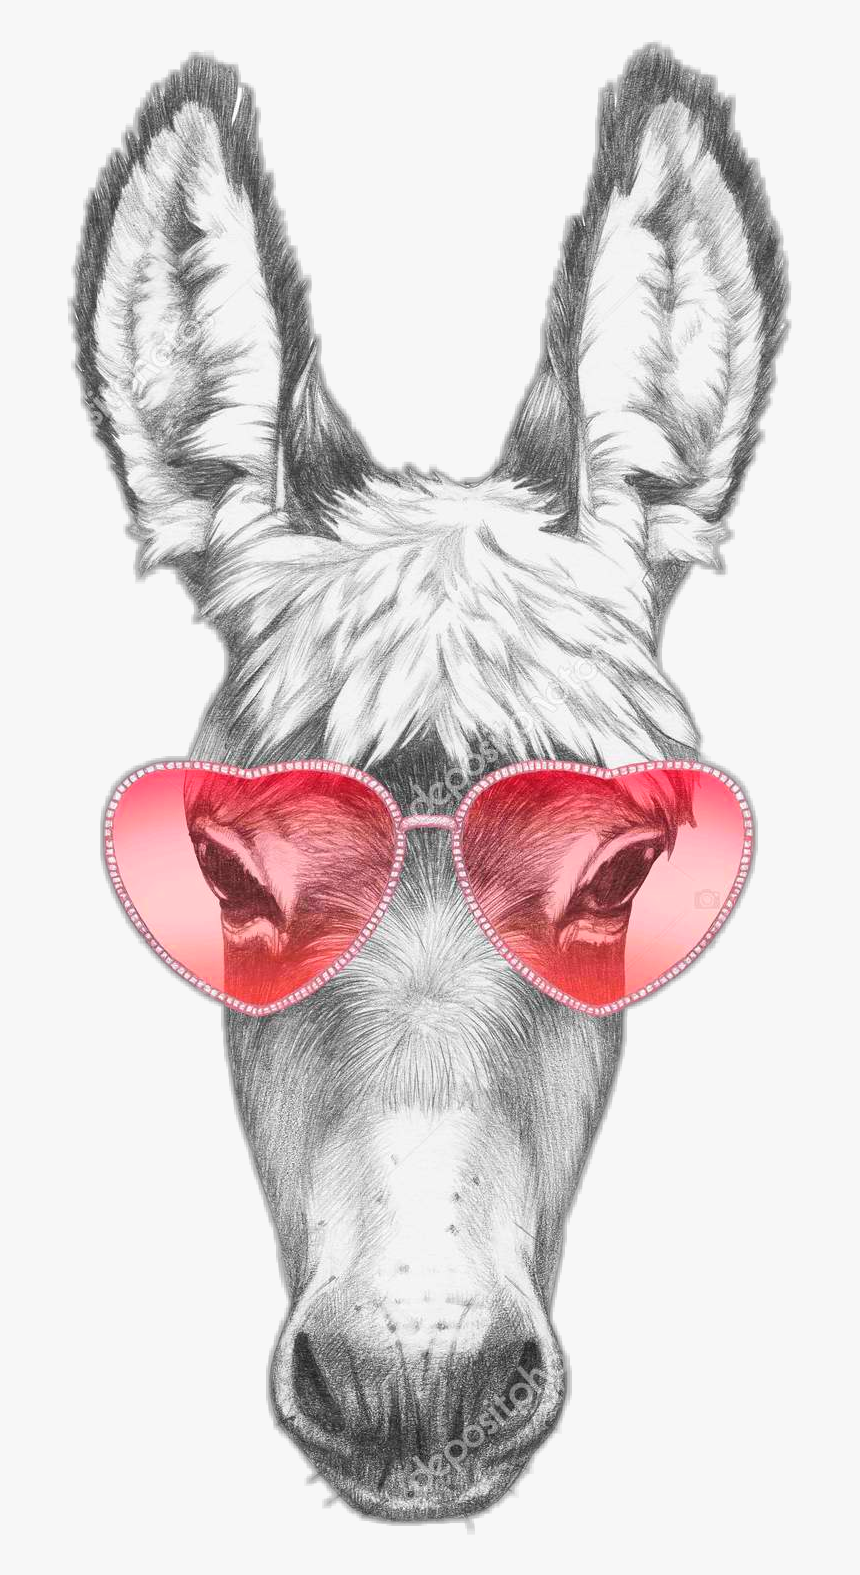 #donkey #donkeys #animal #donky #horse #osioł #sunglasses - Donkey Drawing Portrait, HD Png Download, Free Download